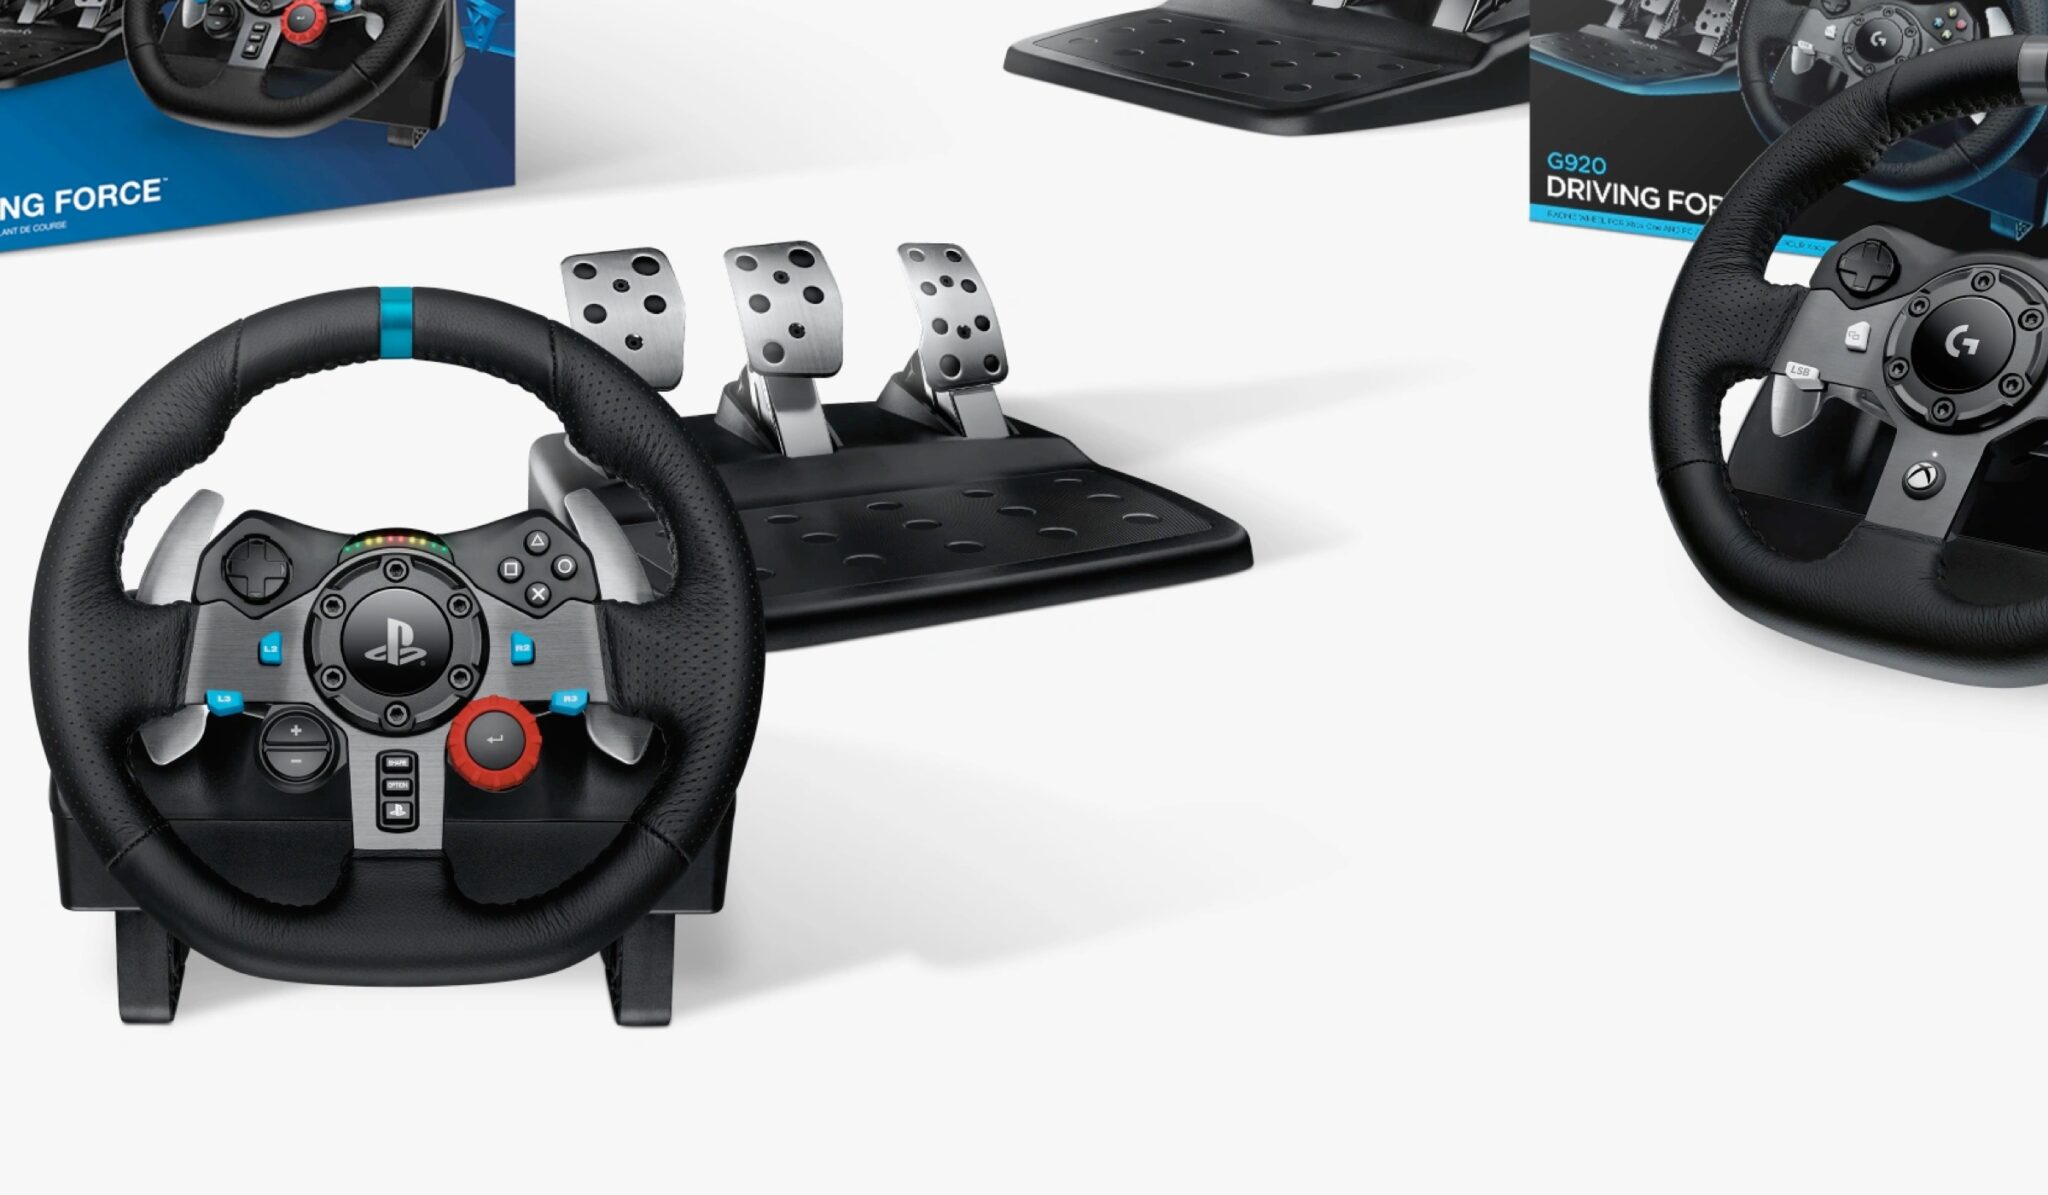 Why Can’t I Change The Key Binds Of My Racing Wheel On Xbox One